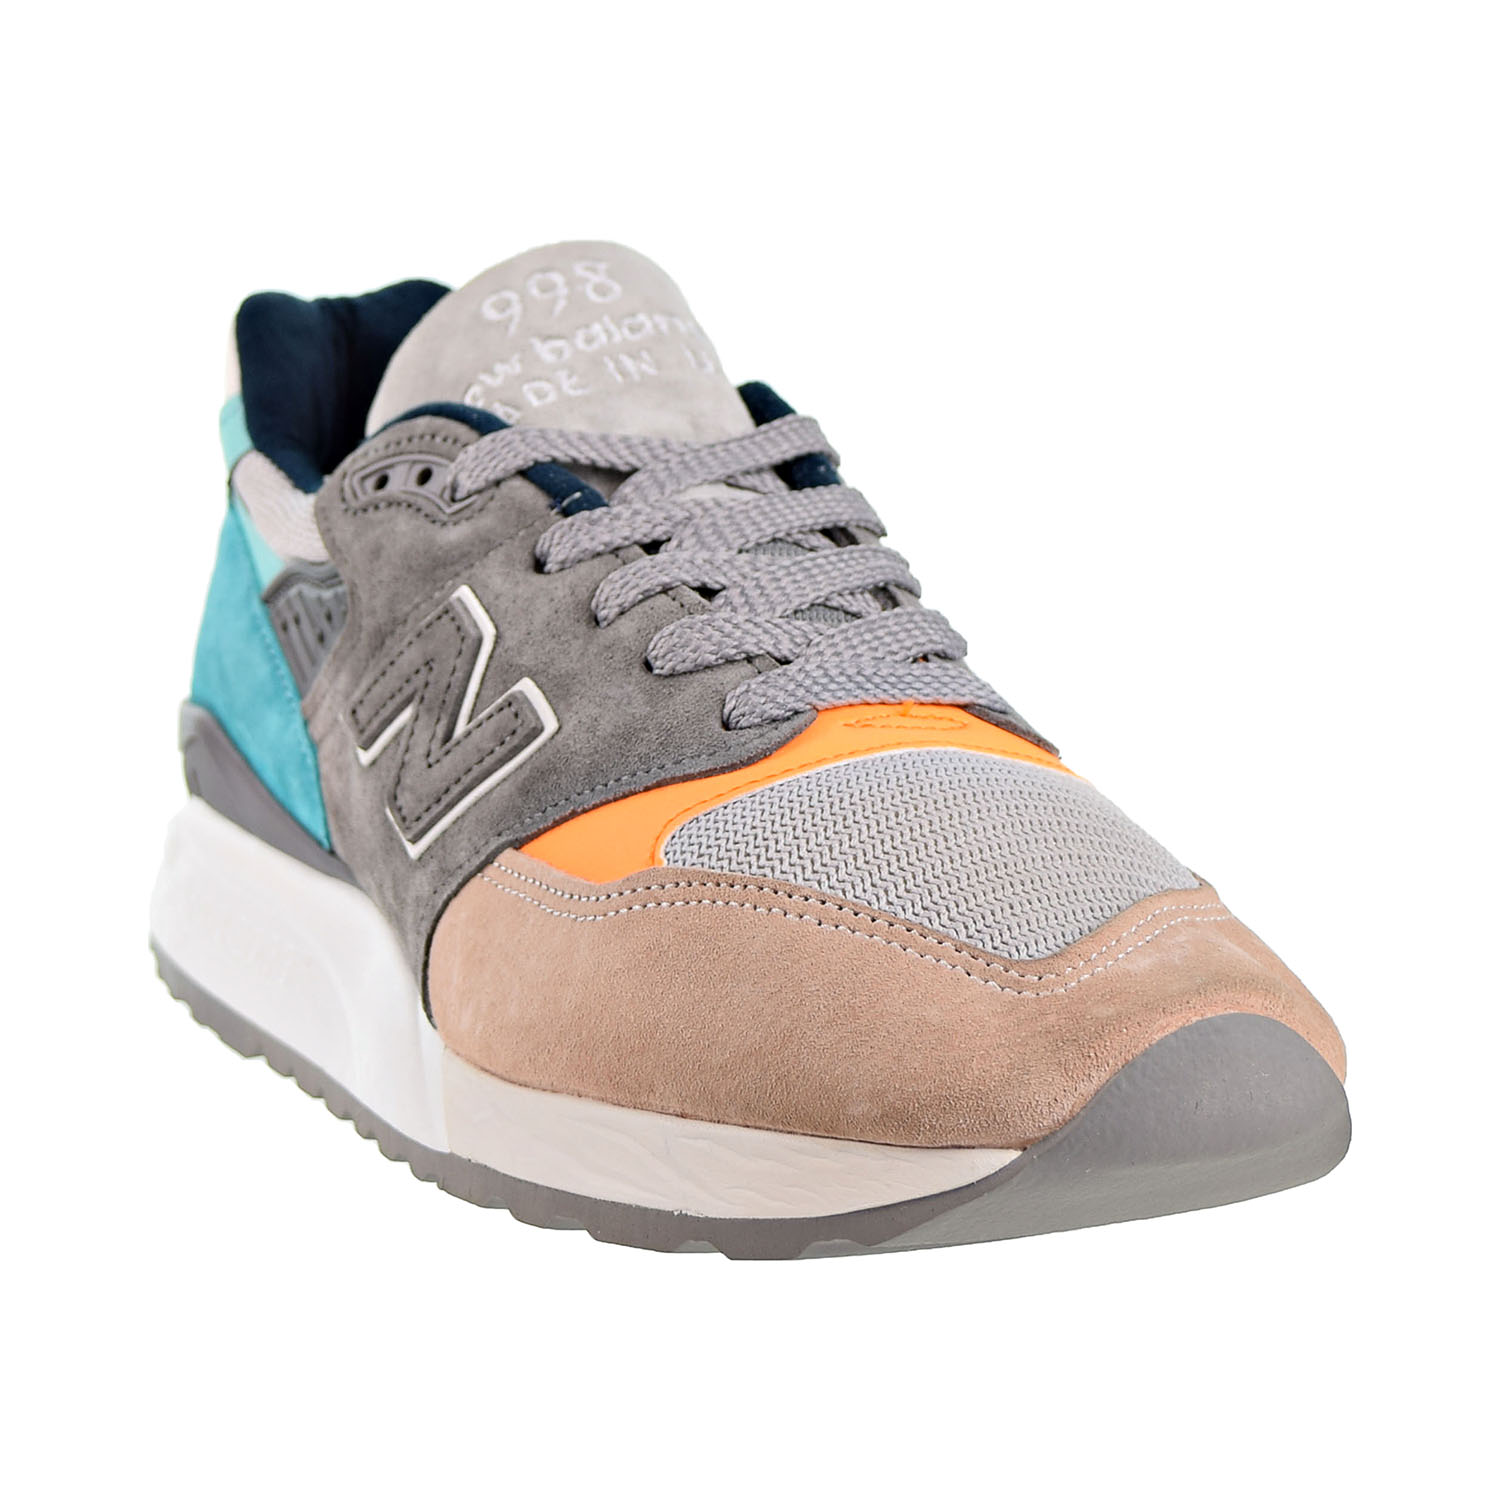 rack Active pace New Balance 998 Classics Made in USA Mens Shoes Orange/Grey m998-awb